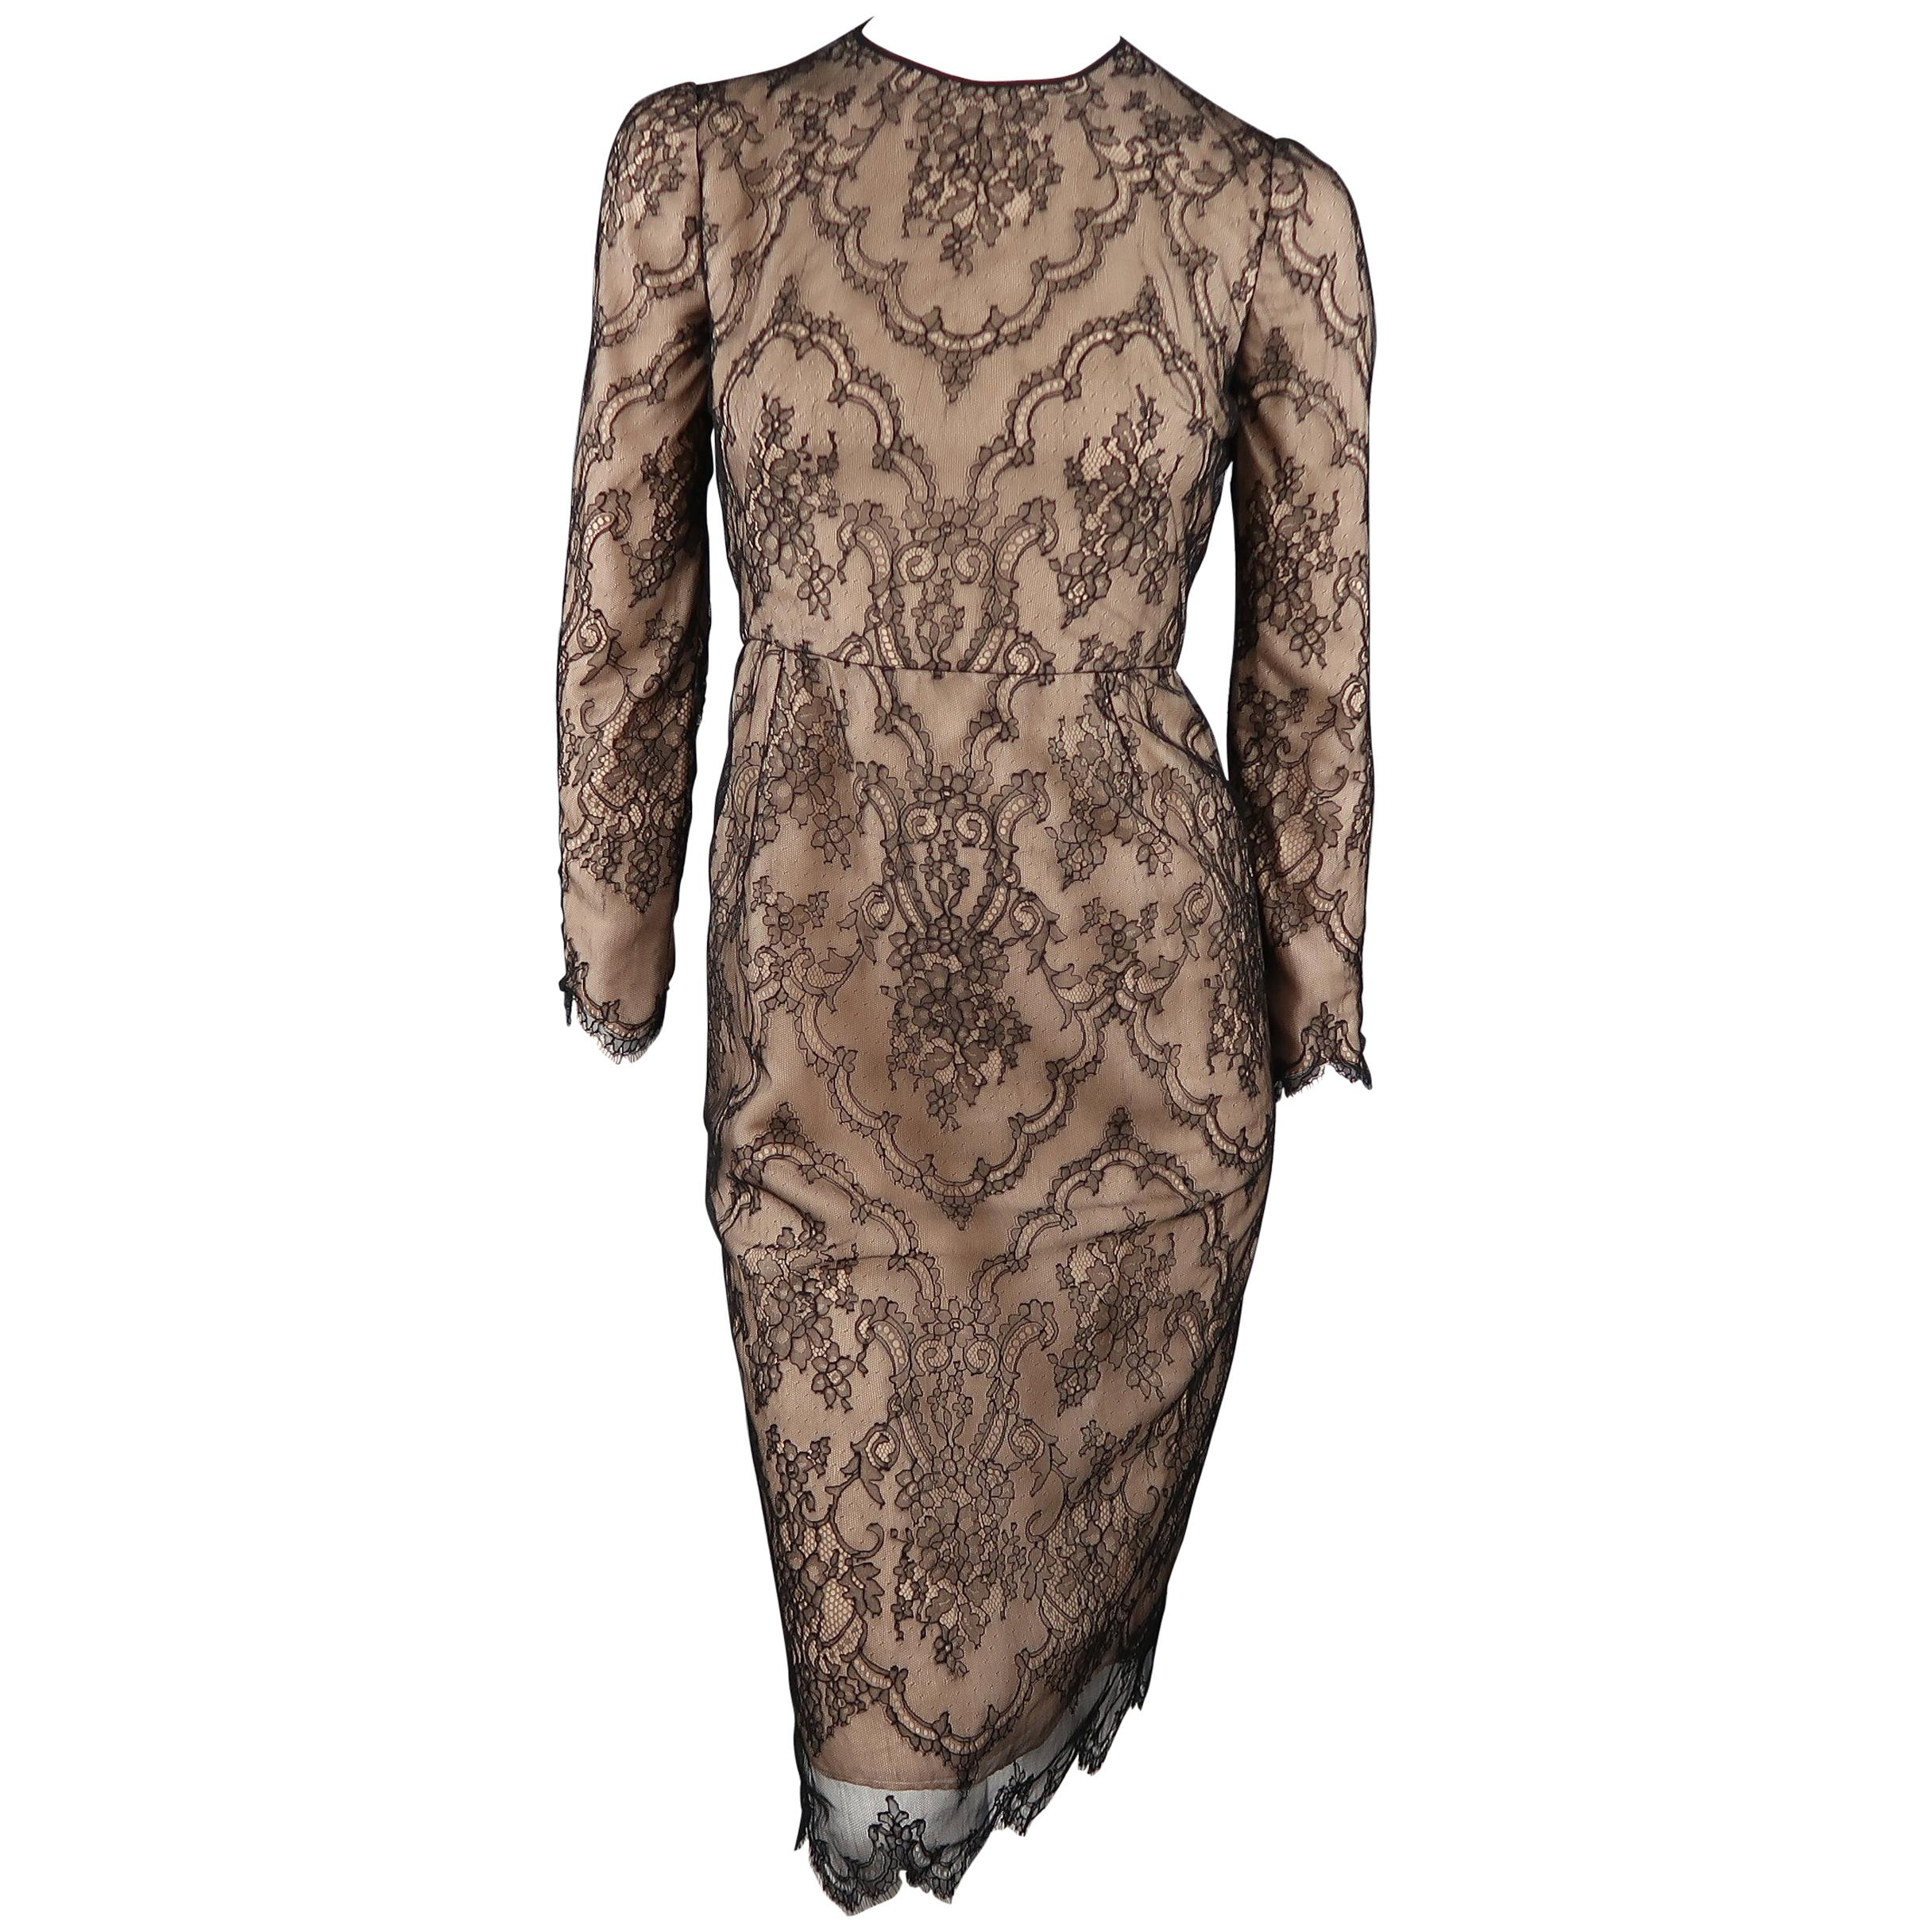 Sold at Auction: 5 Burberry Dresses, incl. Lace & Silk